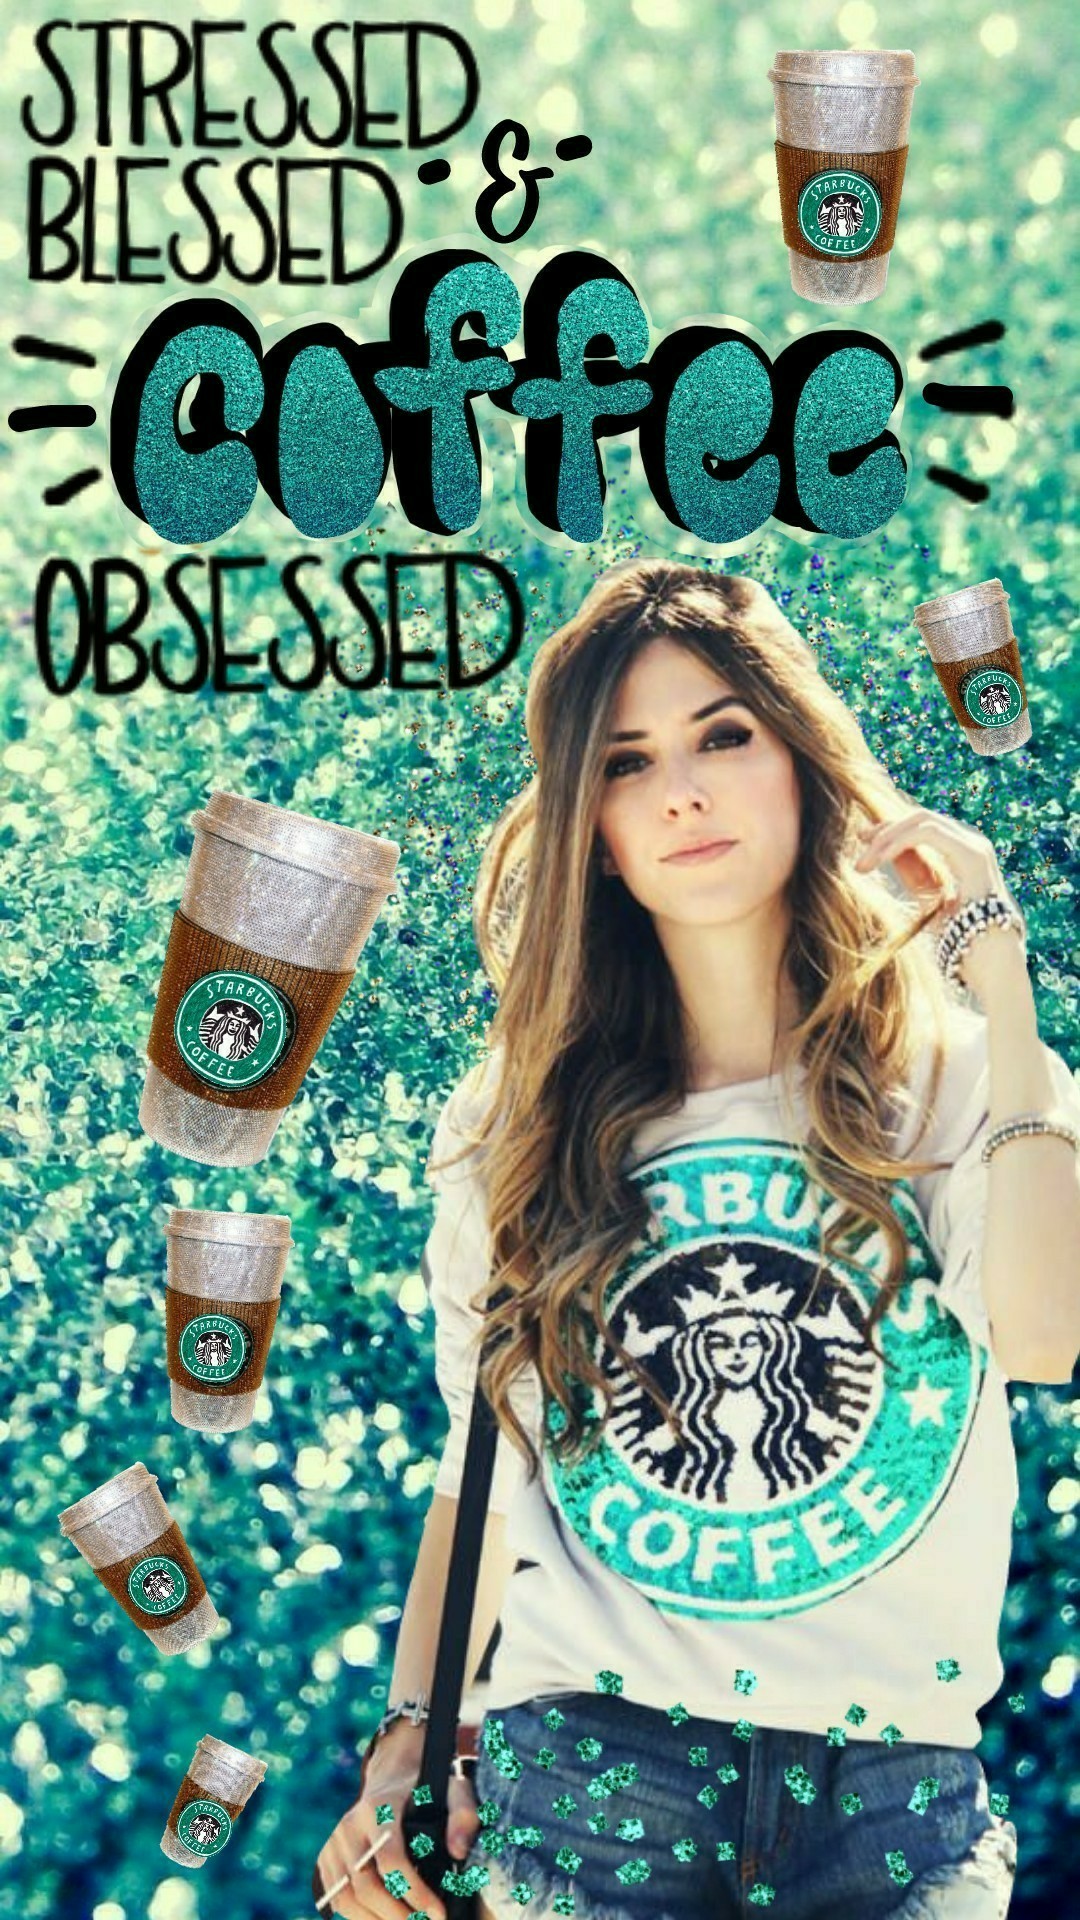 blessed stressed & coffee obsessed 